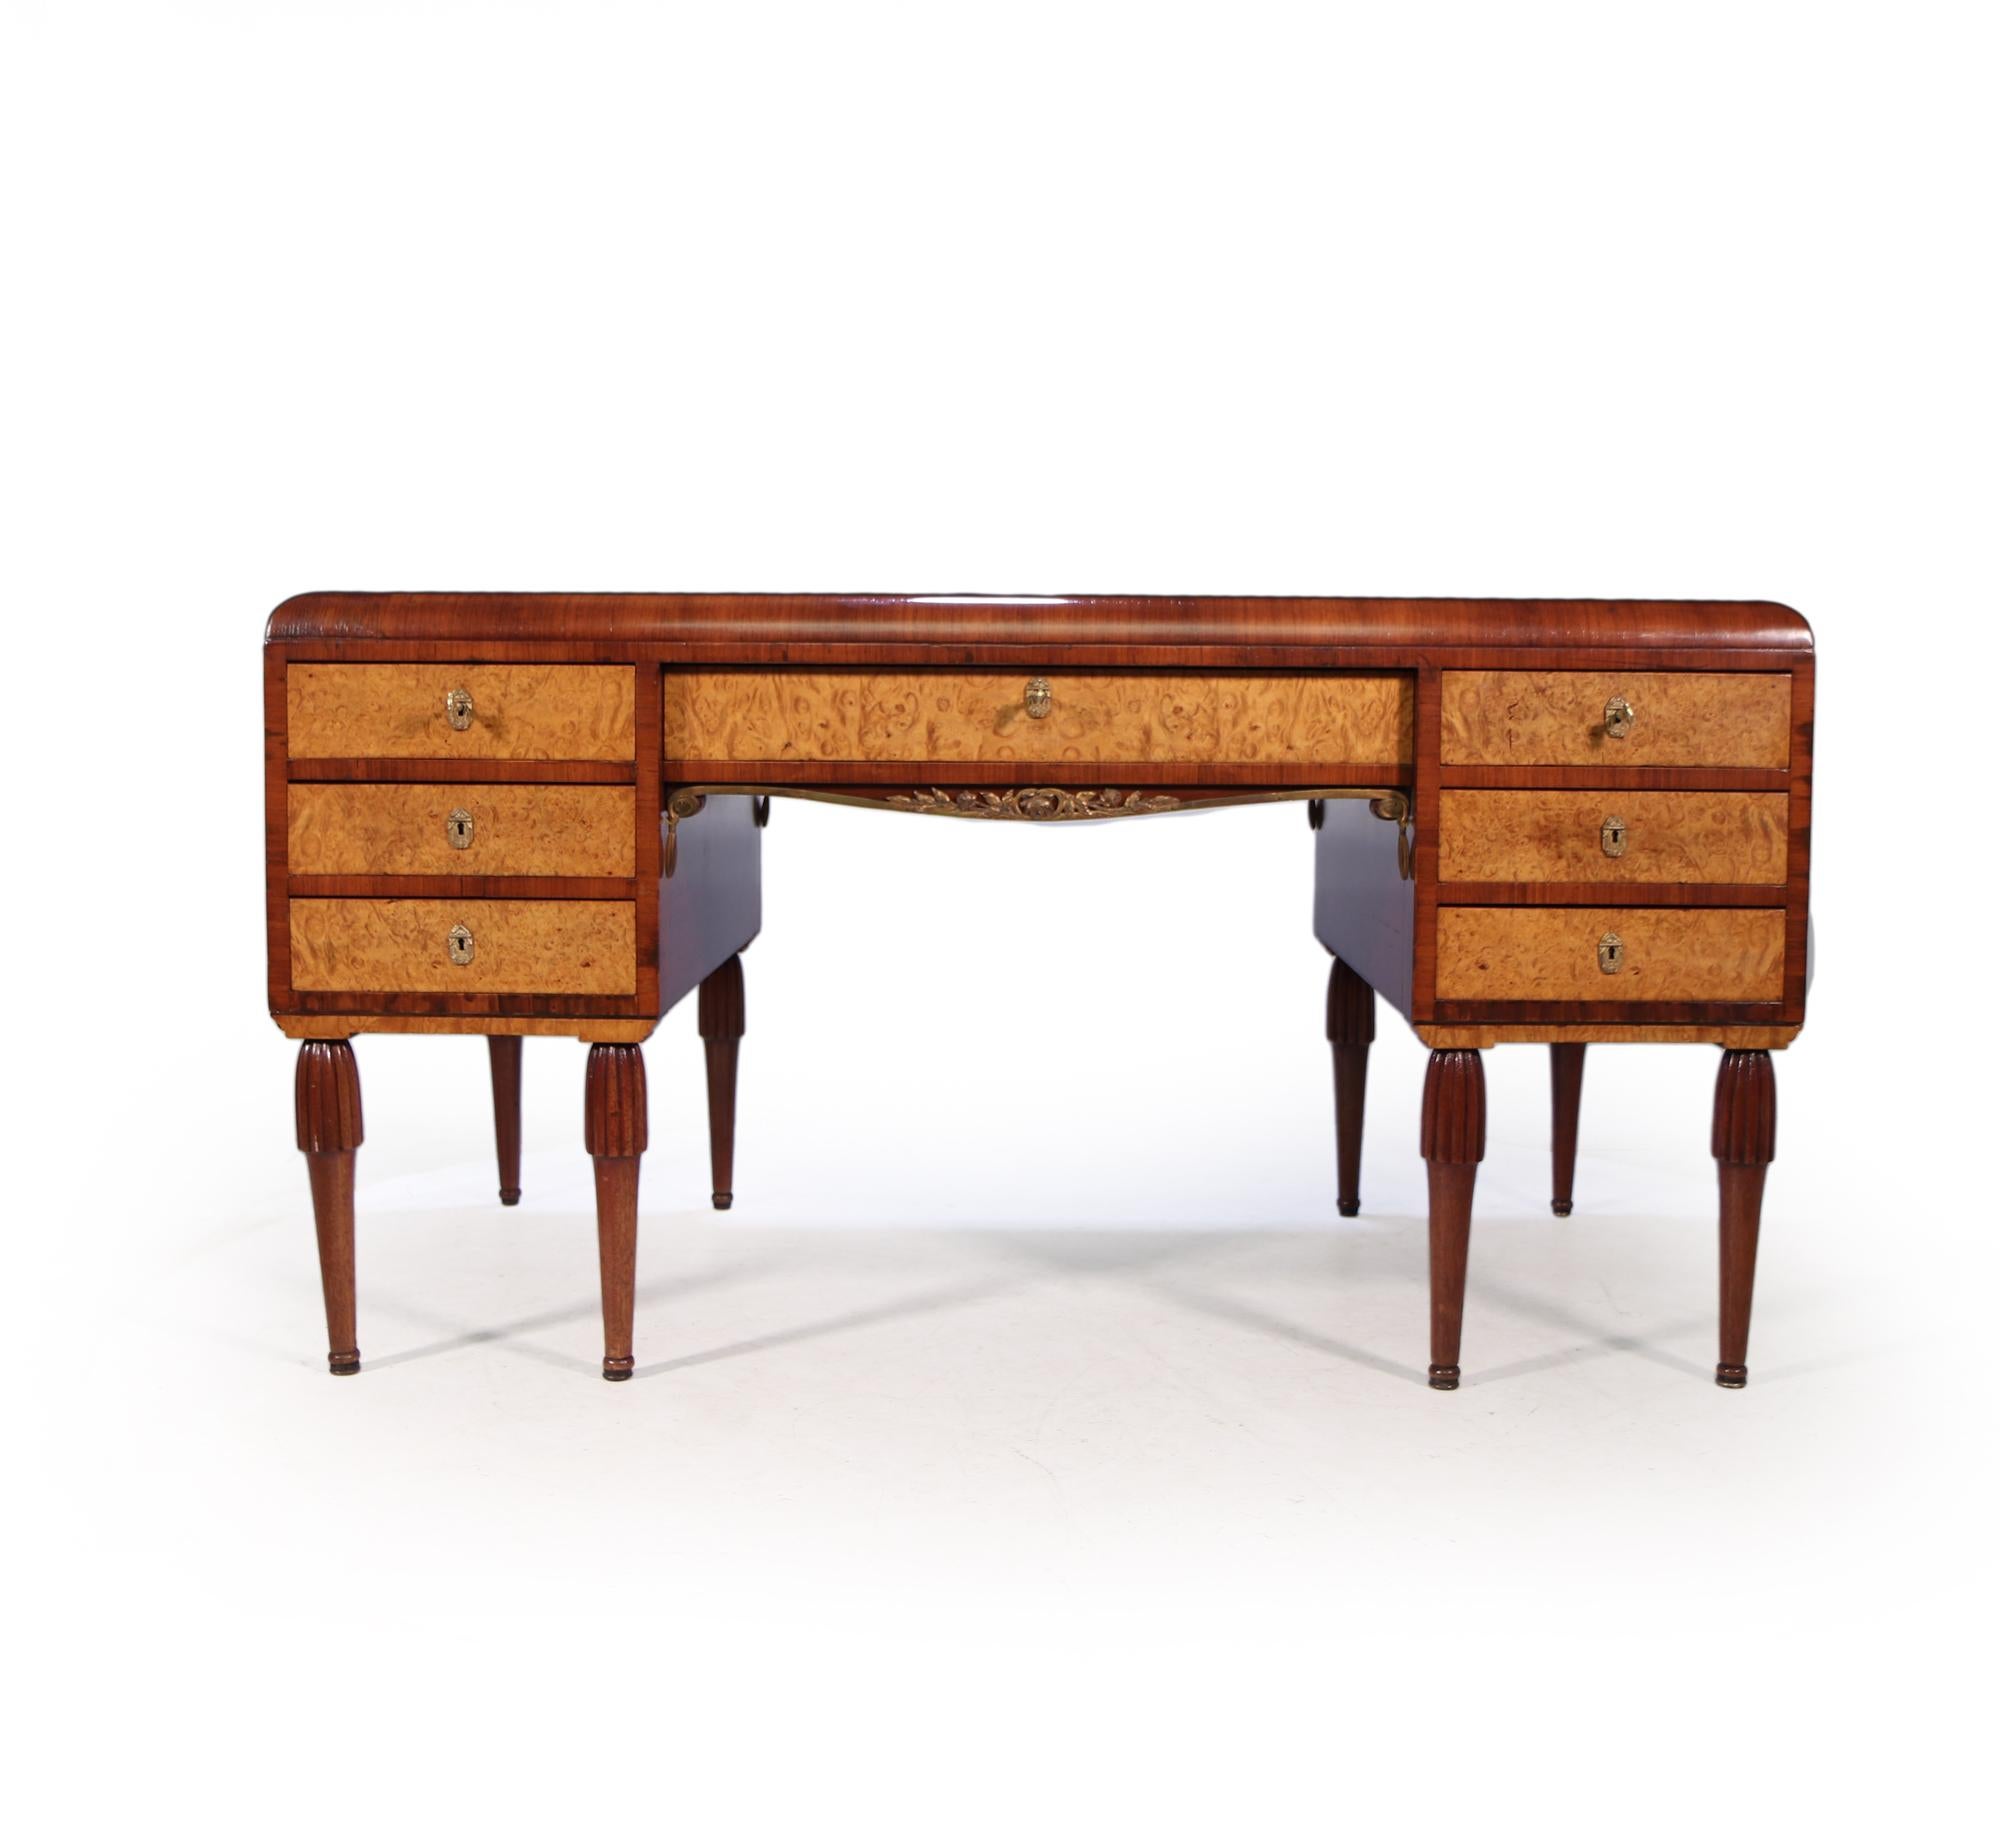 Early 20th Century French Art Deco Writing Table by Maurice Dufrene